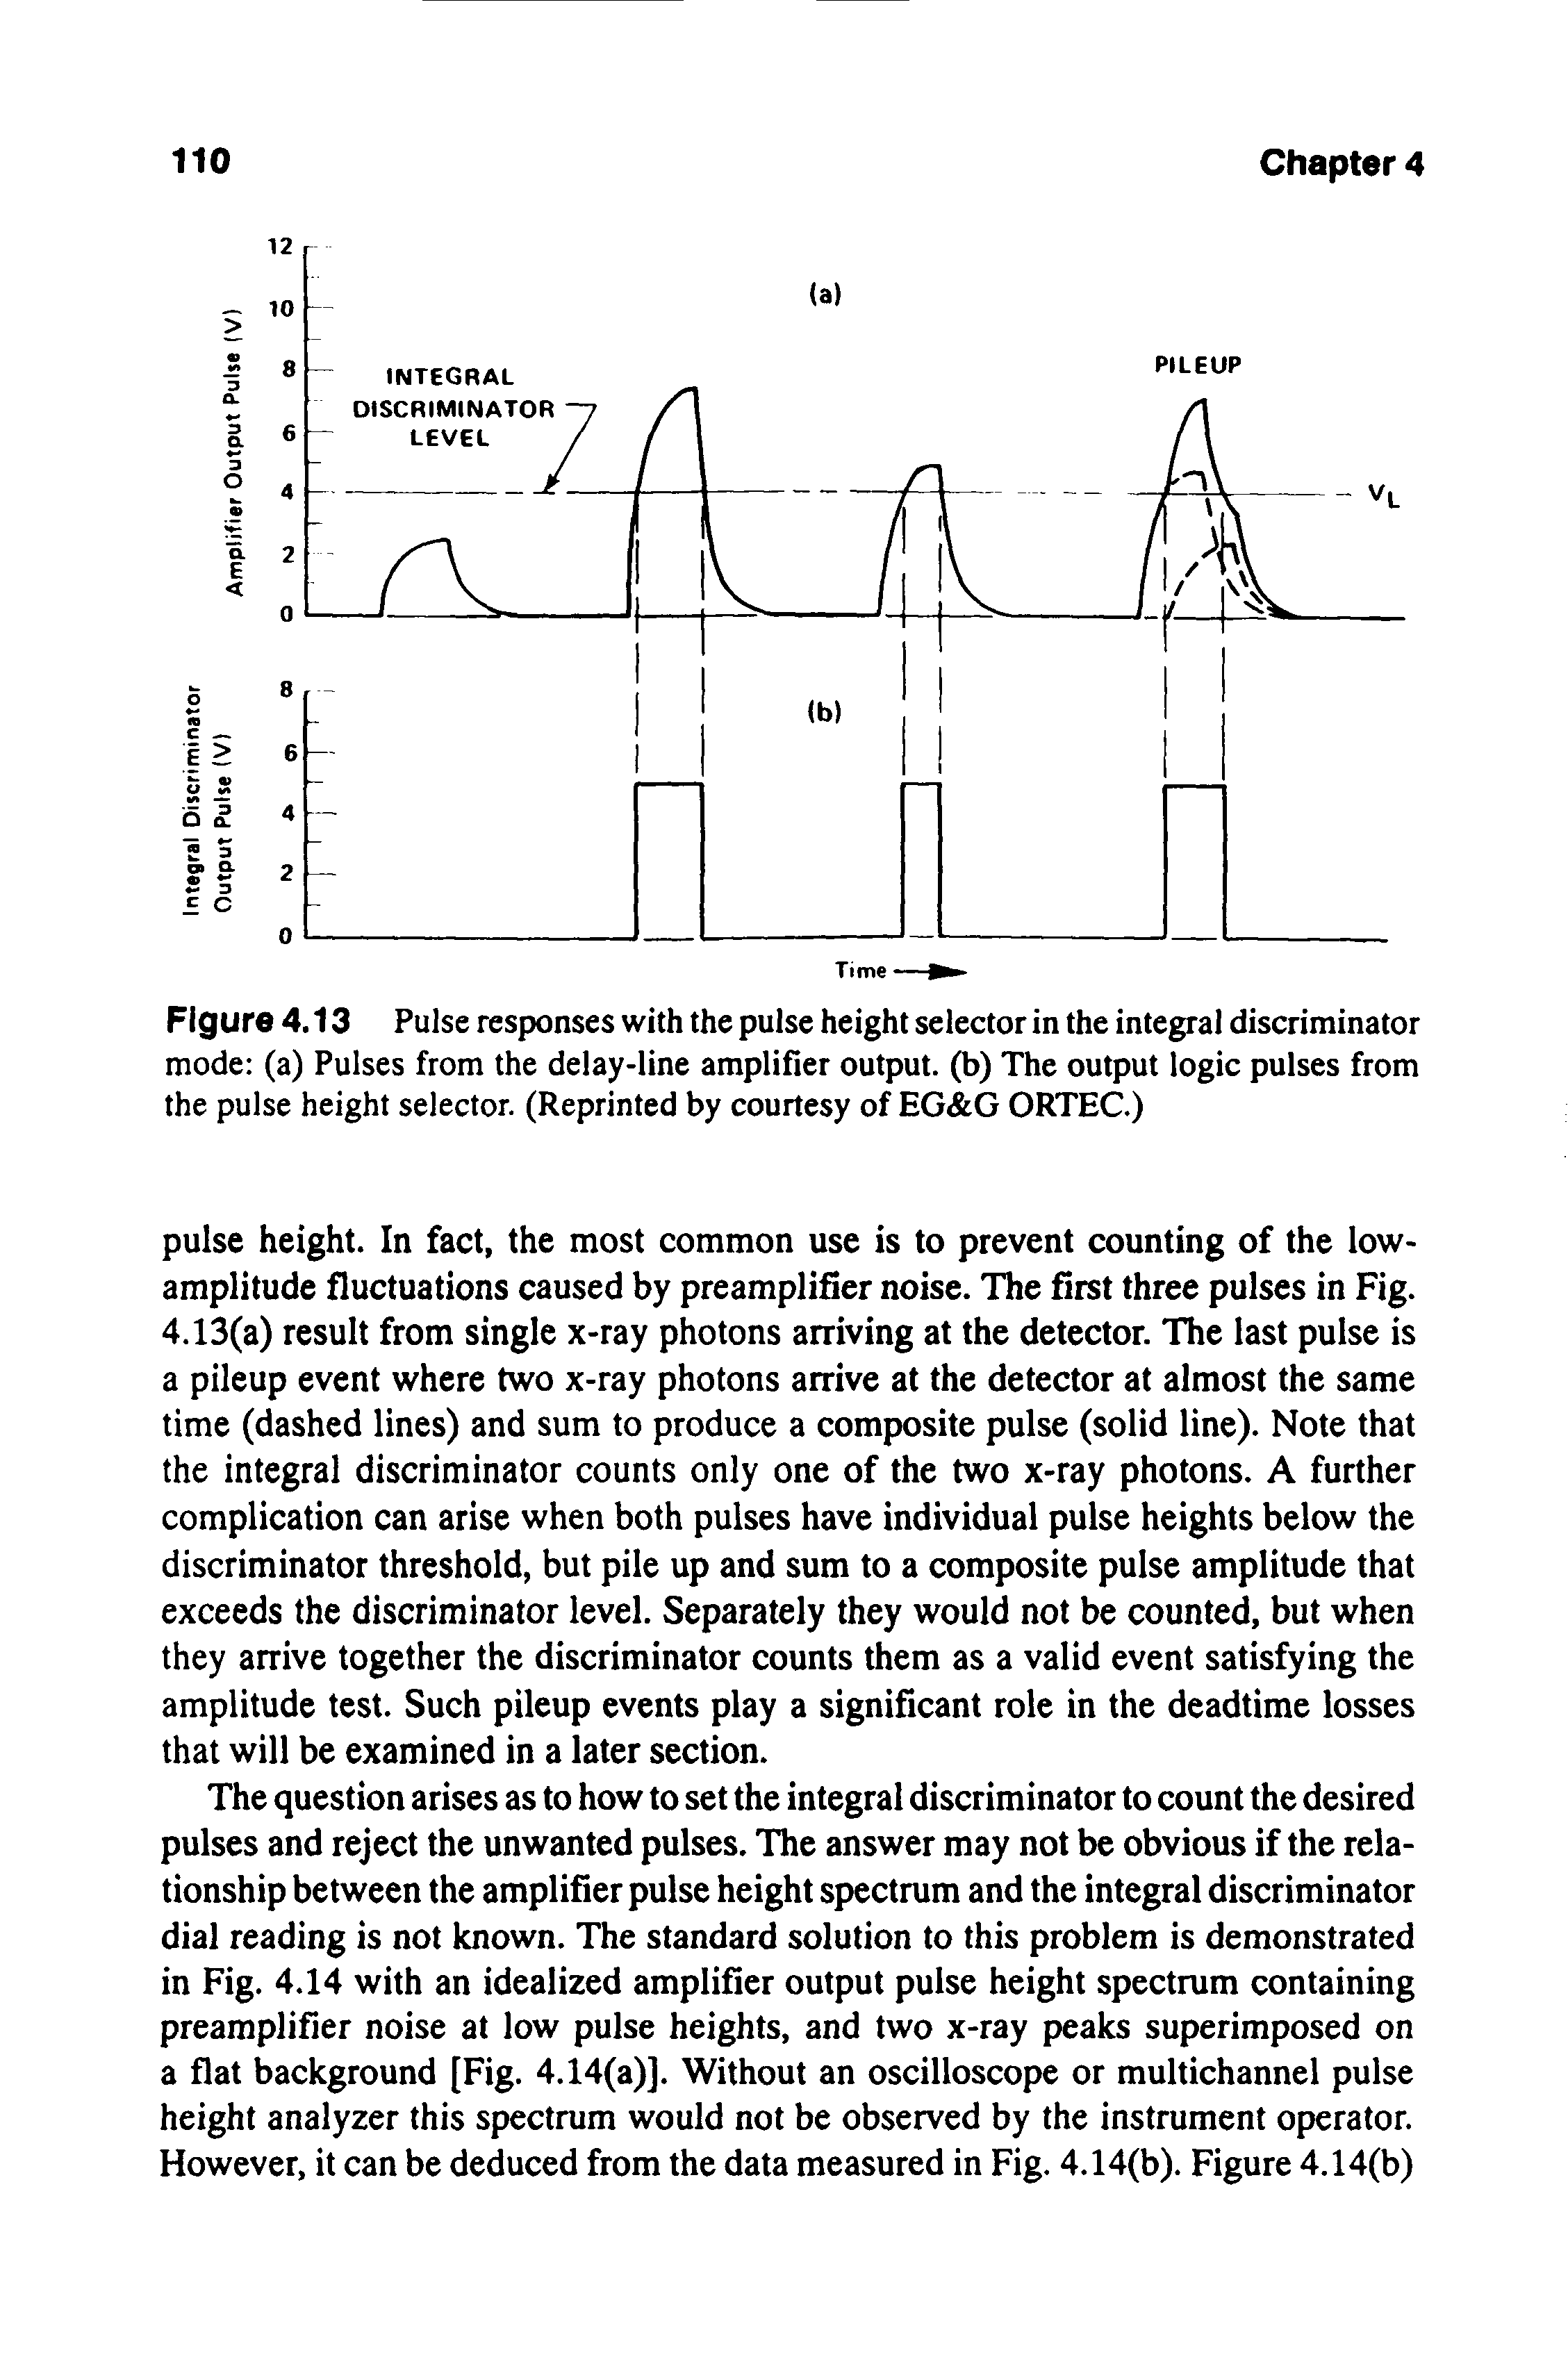 Figure 4.13 Pulse responses with the pulse height selector in the integral discriminator mode (a) Pulses from the delay-line amplifier output, (b) The output logic pulses from the pulse height selector. (Reprinted by courtesy of EG G ORTEC.)...